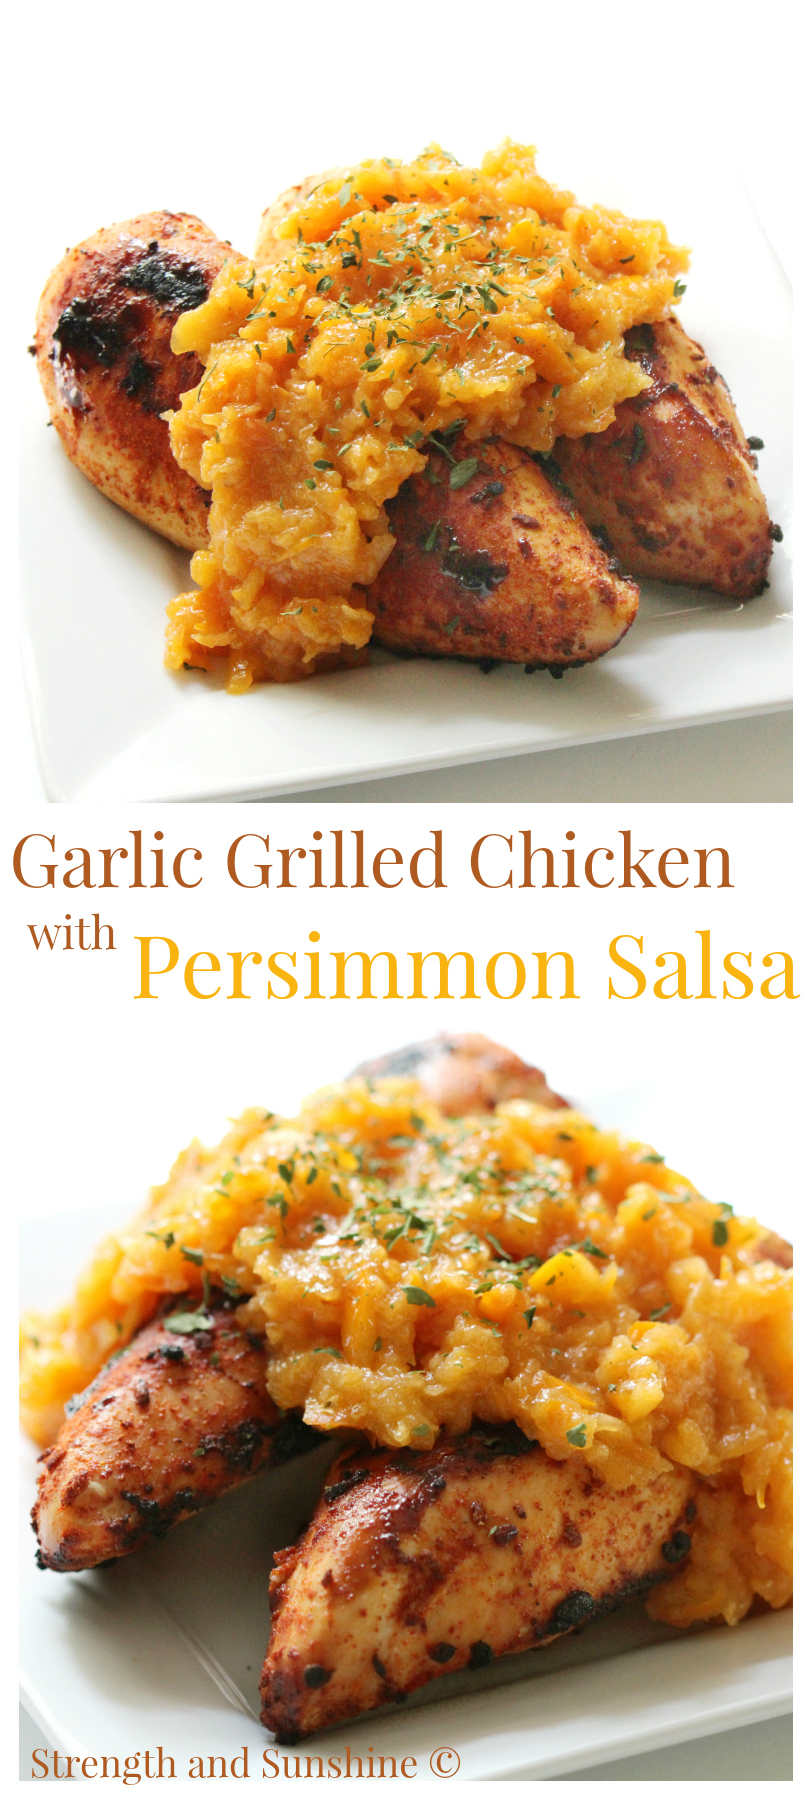 Garlic Grilled Chicken With Persimmon Salsa | Strength and Sunshine @RebeccaGF666 Savory garlic grilled chicken with a subtly sweet persimmon salsa is the perfect combo to make your grilled chicken even better! Gluten-free and paleo, this grilled chicken recipe will be on the dinner menu every week!